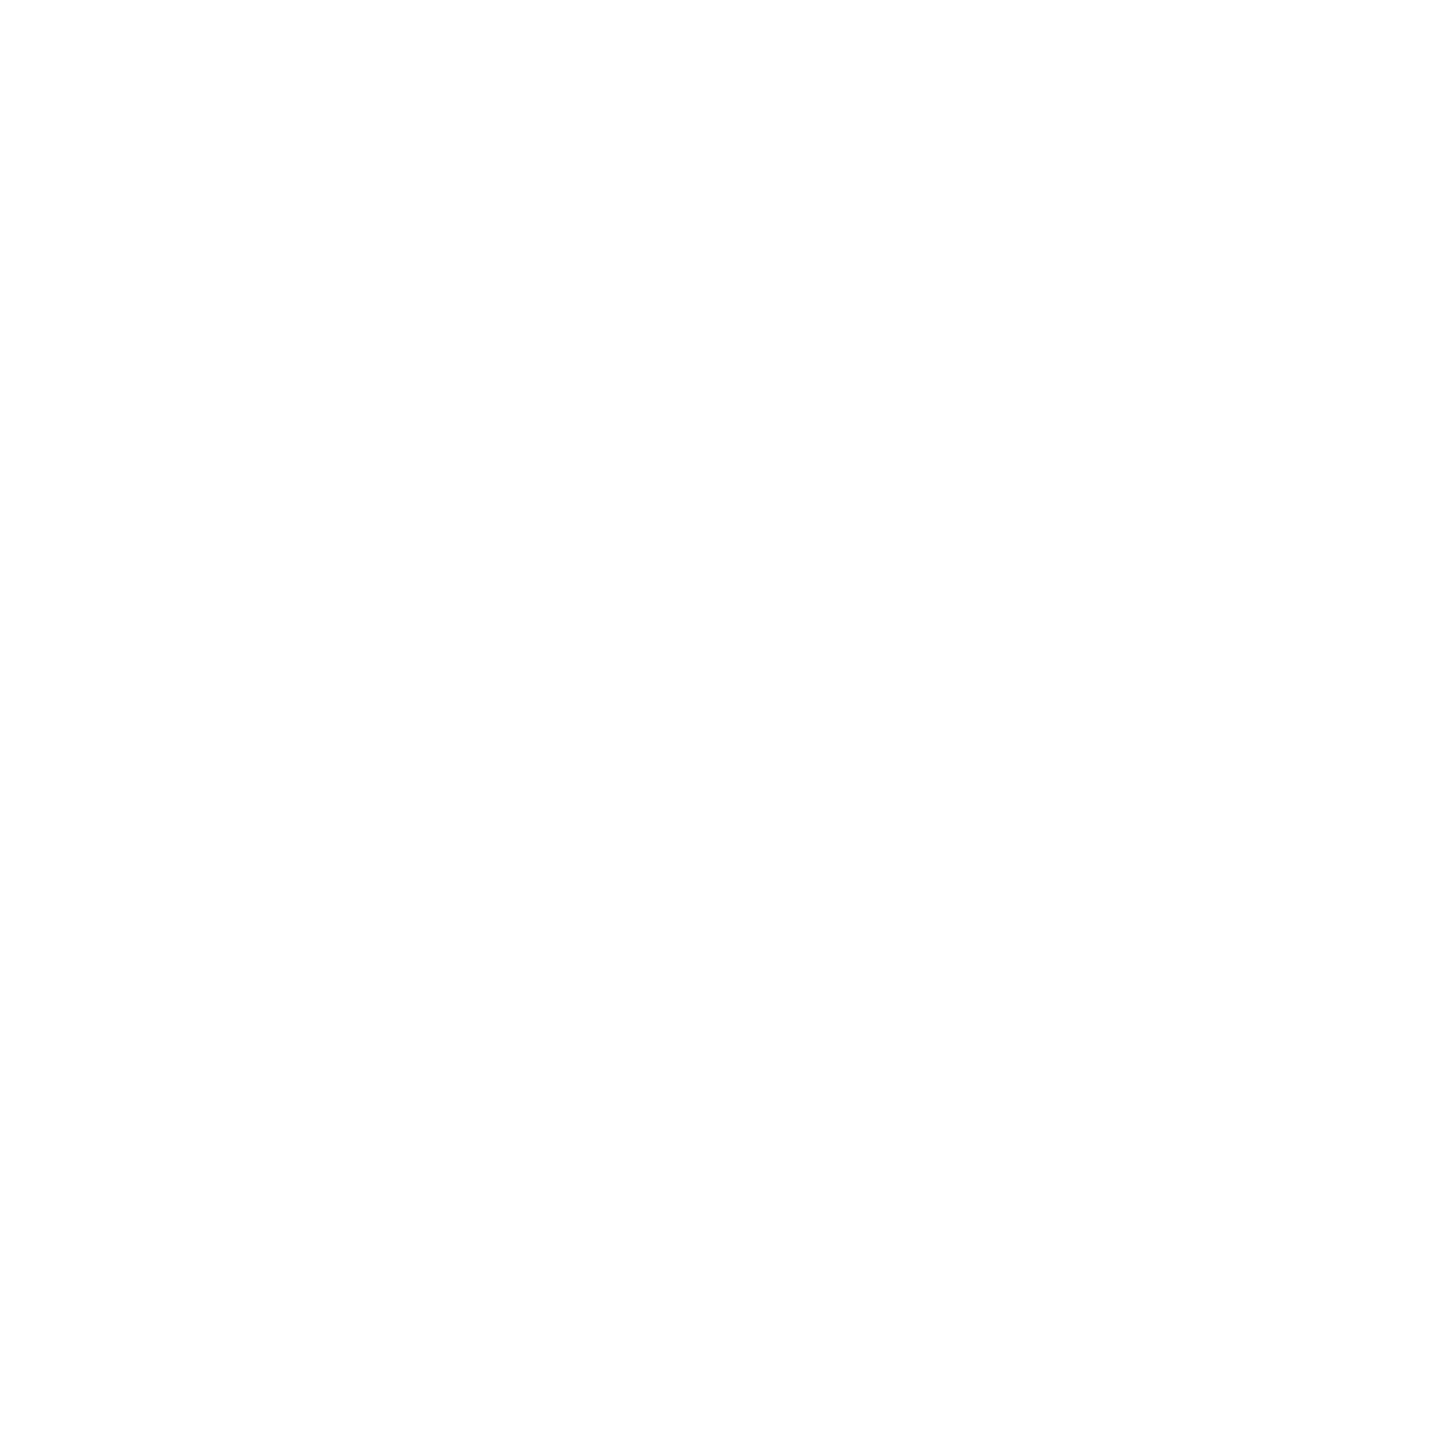 I am adding you to my to-do list